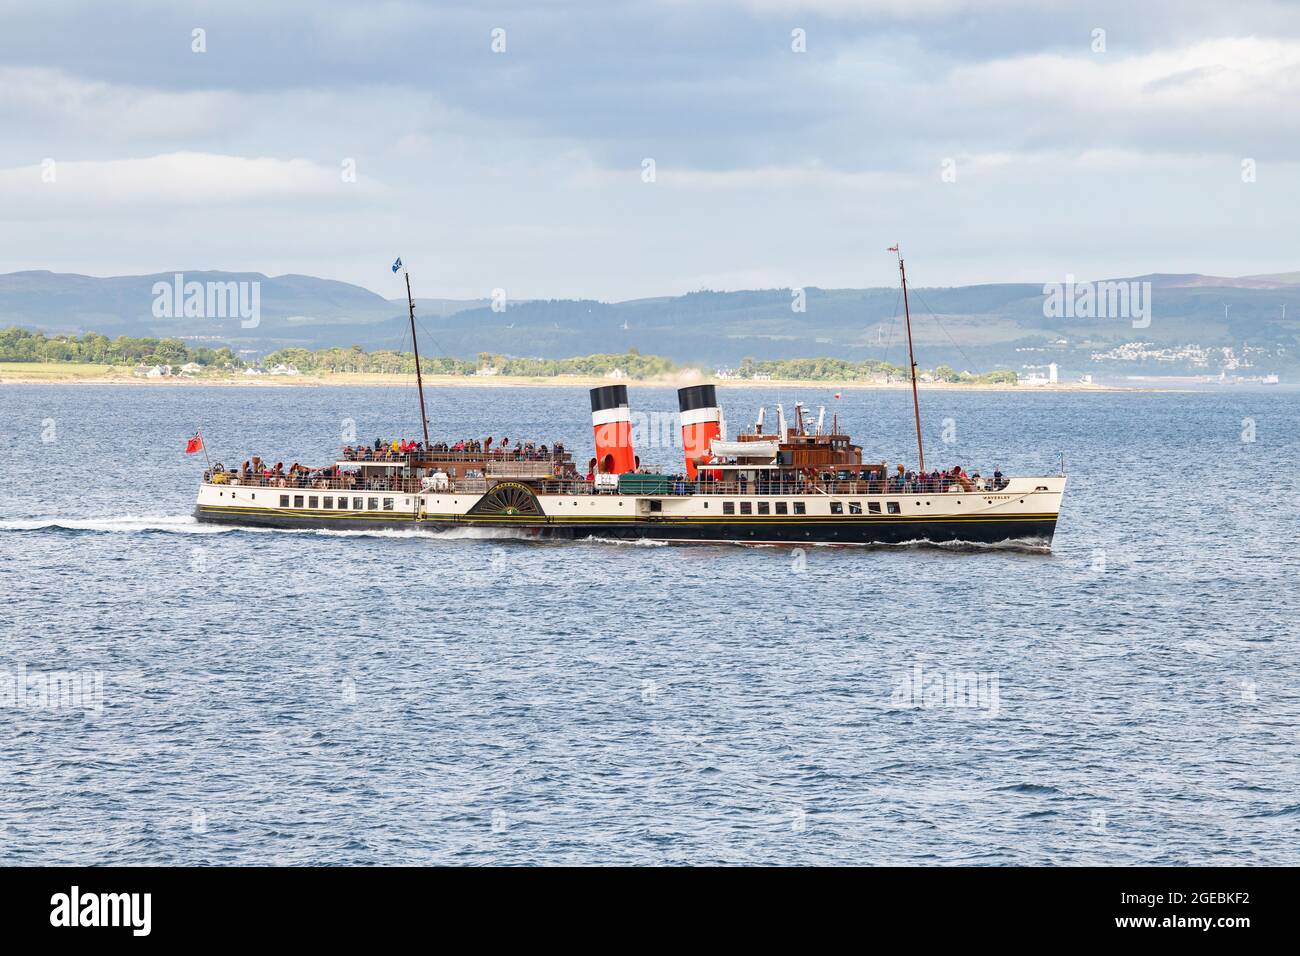 The Waverley Paddle Steamer, Firth of Clyde approchant Rothesay, île de Bute, Écosse, Royaume-Uni Banque D'Images